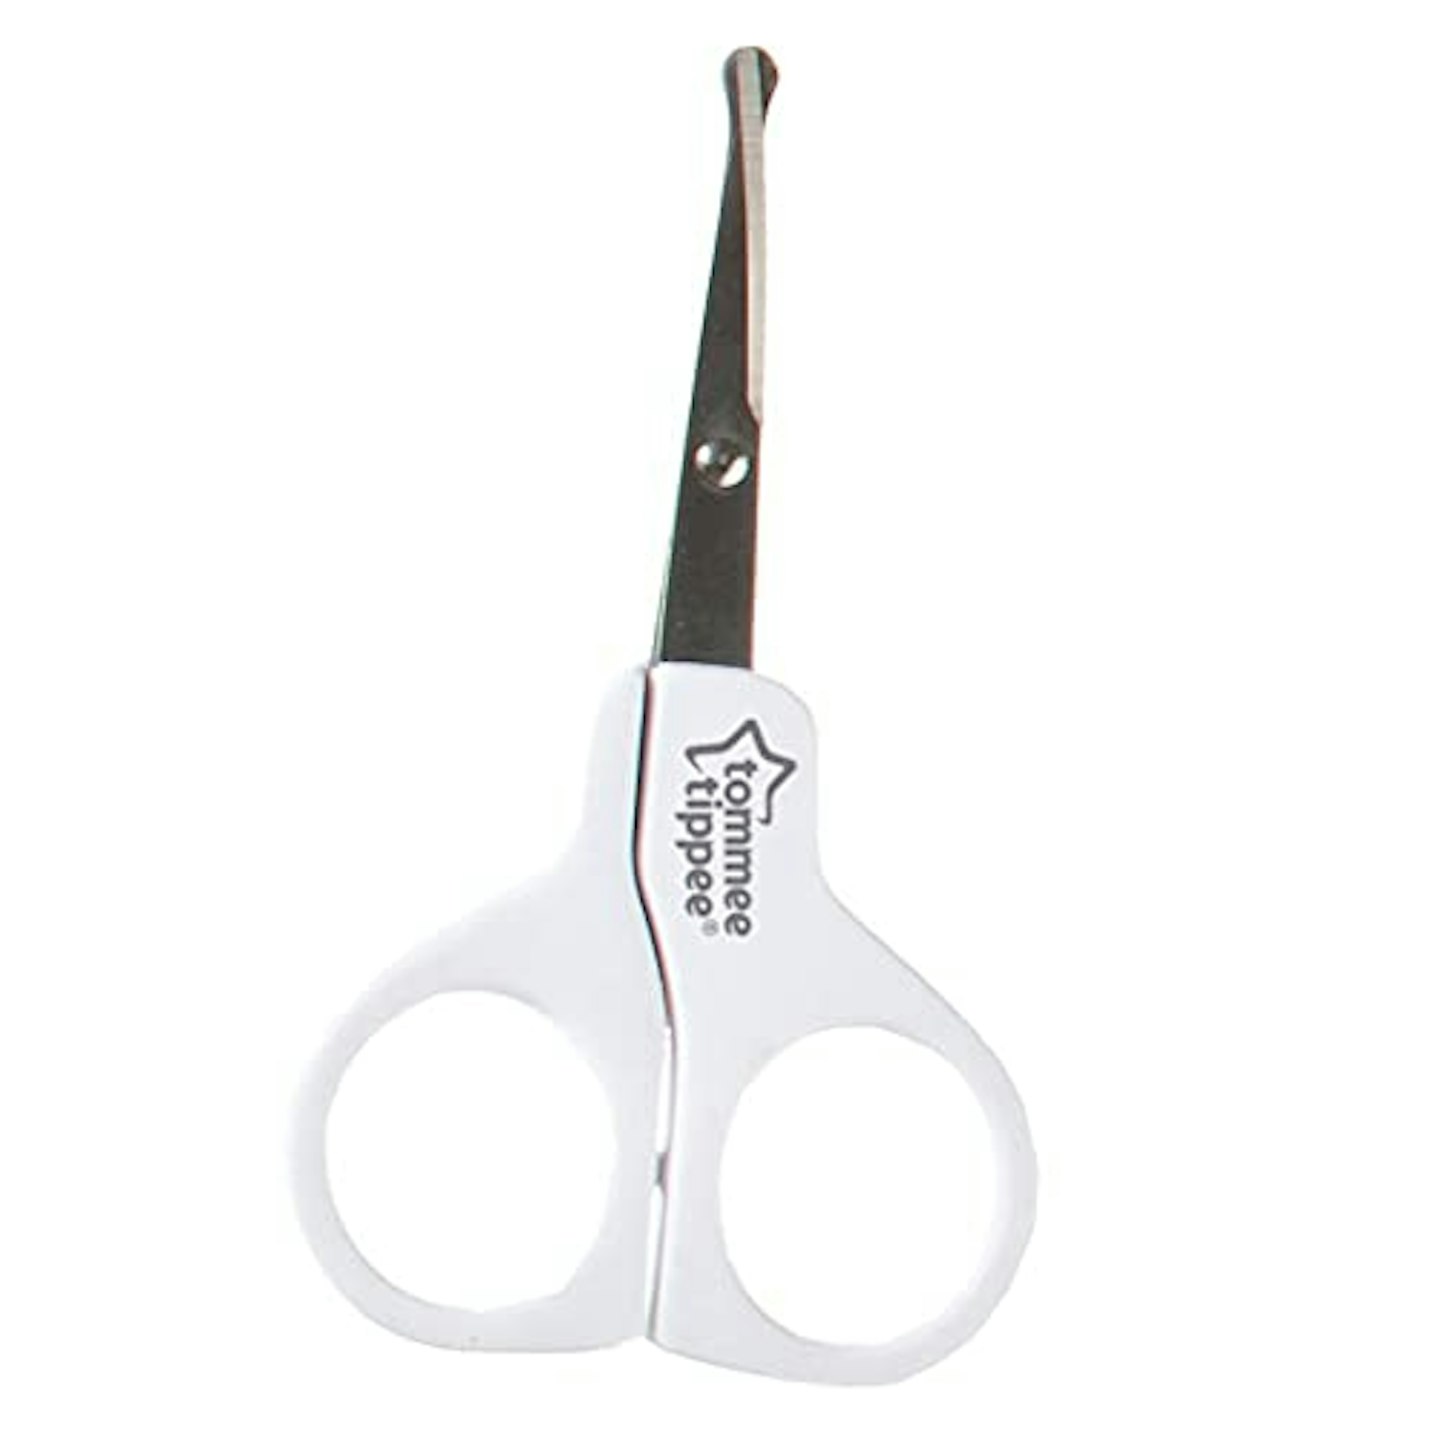 The best baby nail scissors 